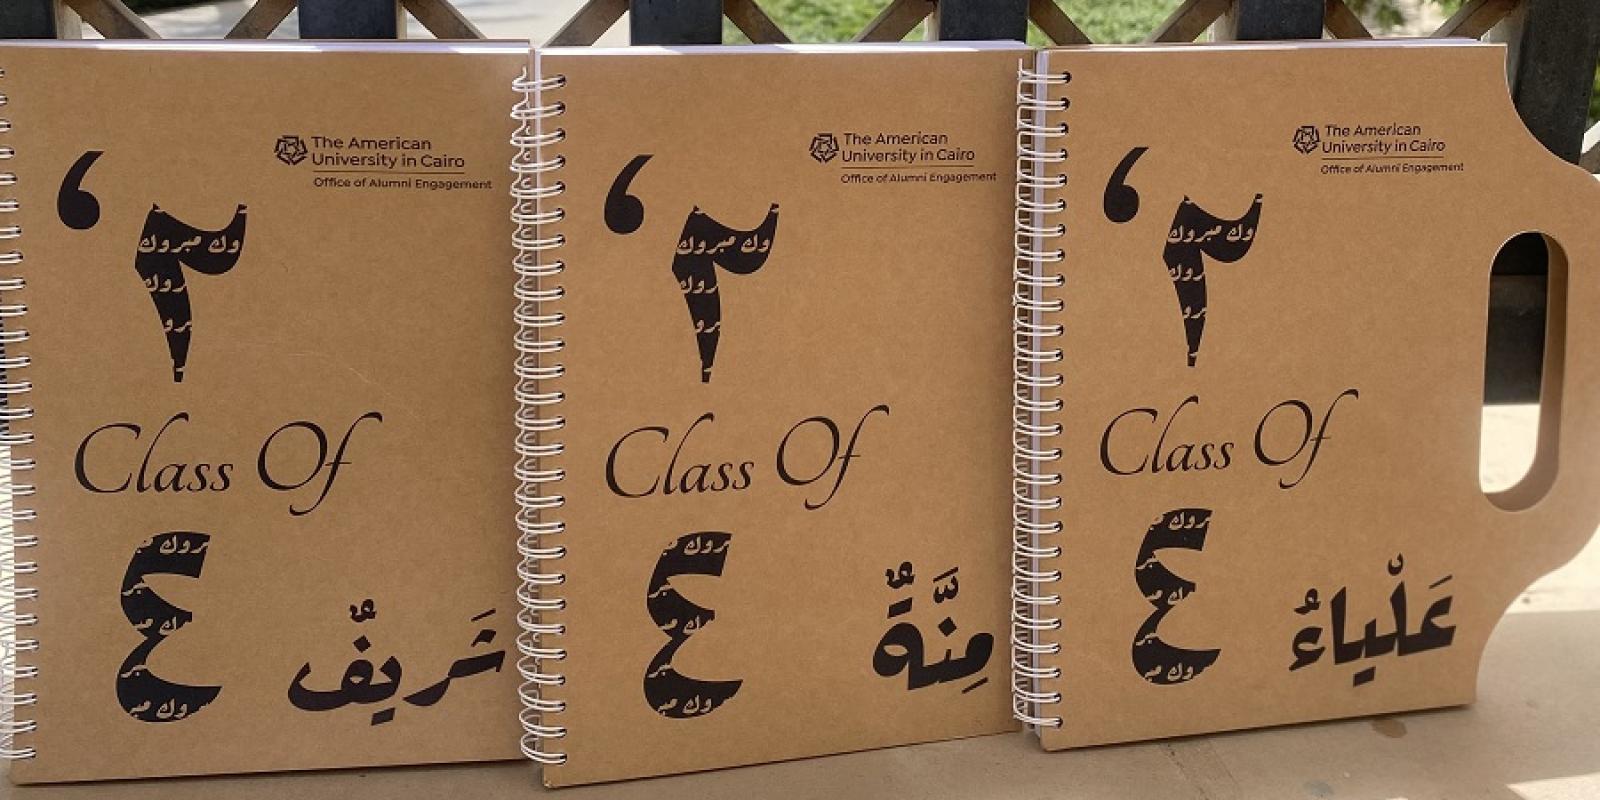 Notebooks. Text: The American University in Cairo. Office of  Alumni Engagement. Class of 24 in Arabic numbers. The names Aliaa, Menna and Sherif in Arabic